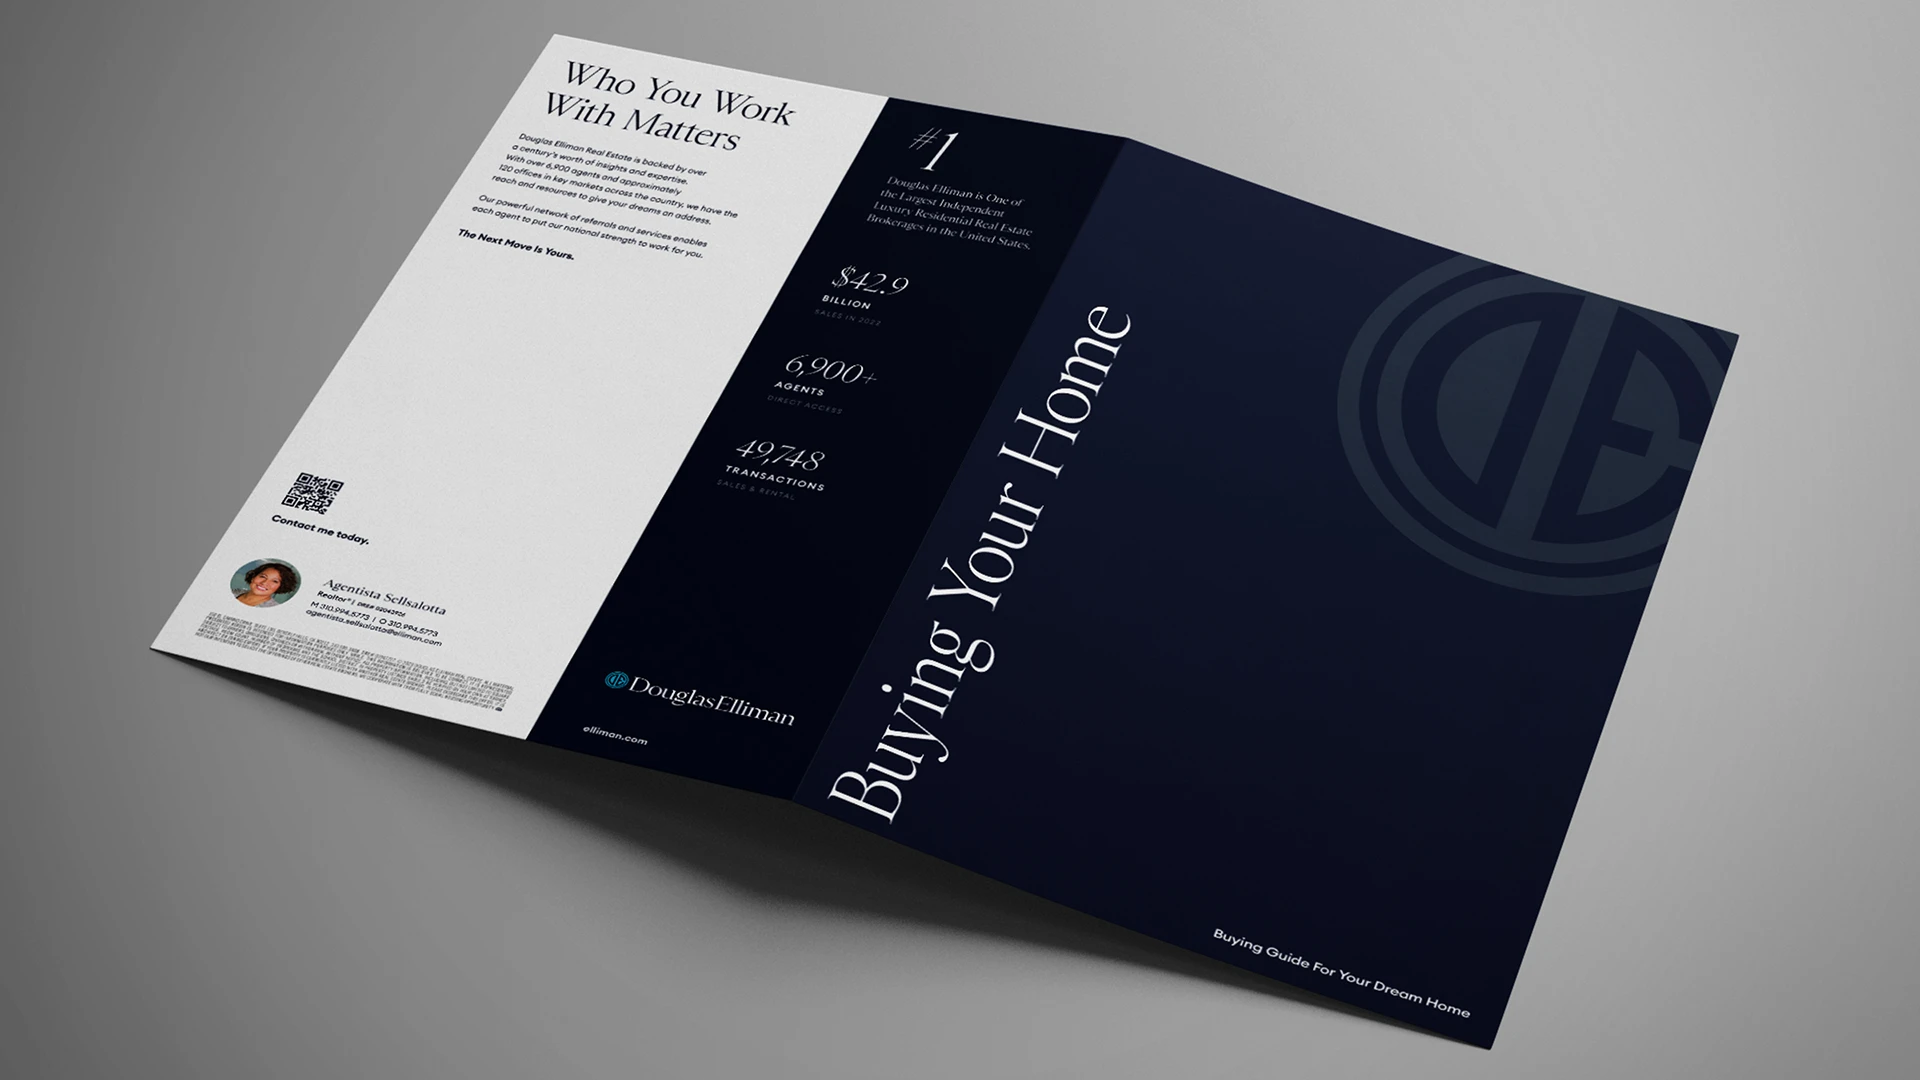 The back and cover of the Buyer's Guide for Douglas Elliman.